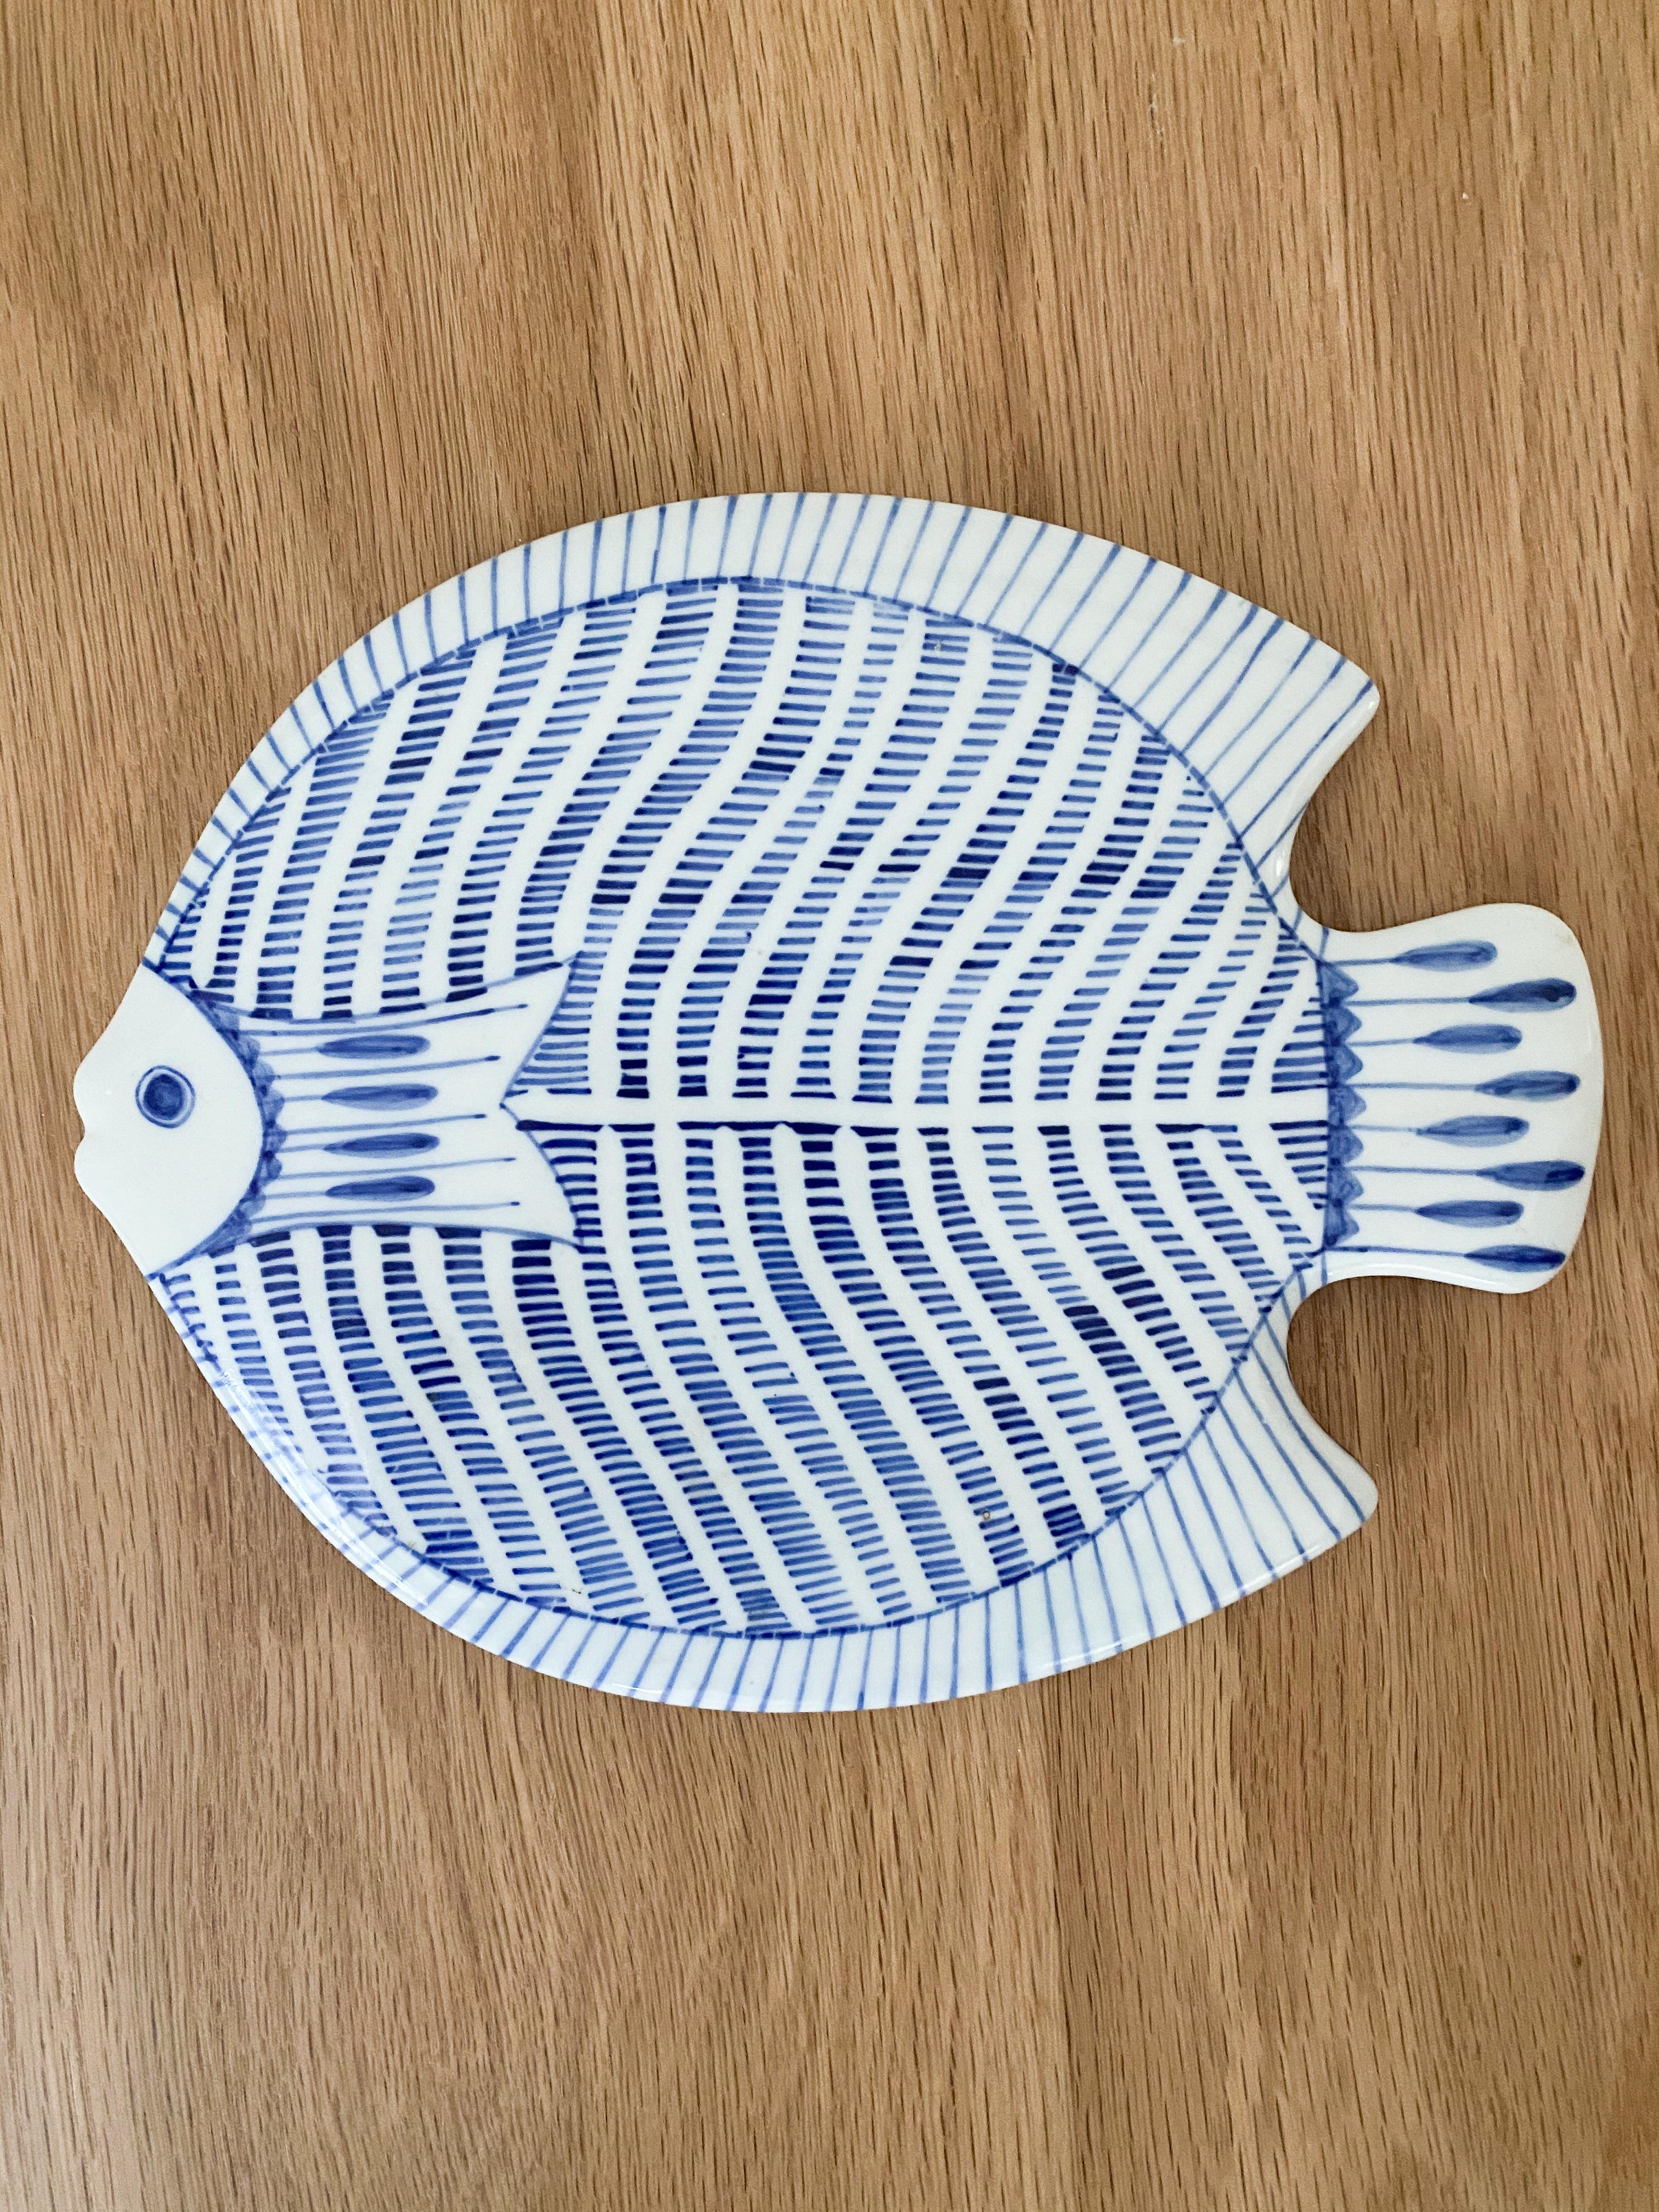 Vintage pair of hand painted ceramic fish plates. Beautiful blue painted details on white ceramic. Great as table display or as trivets.